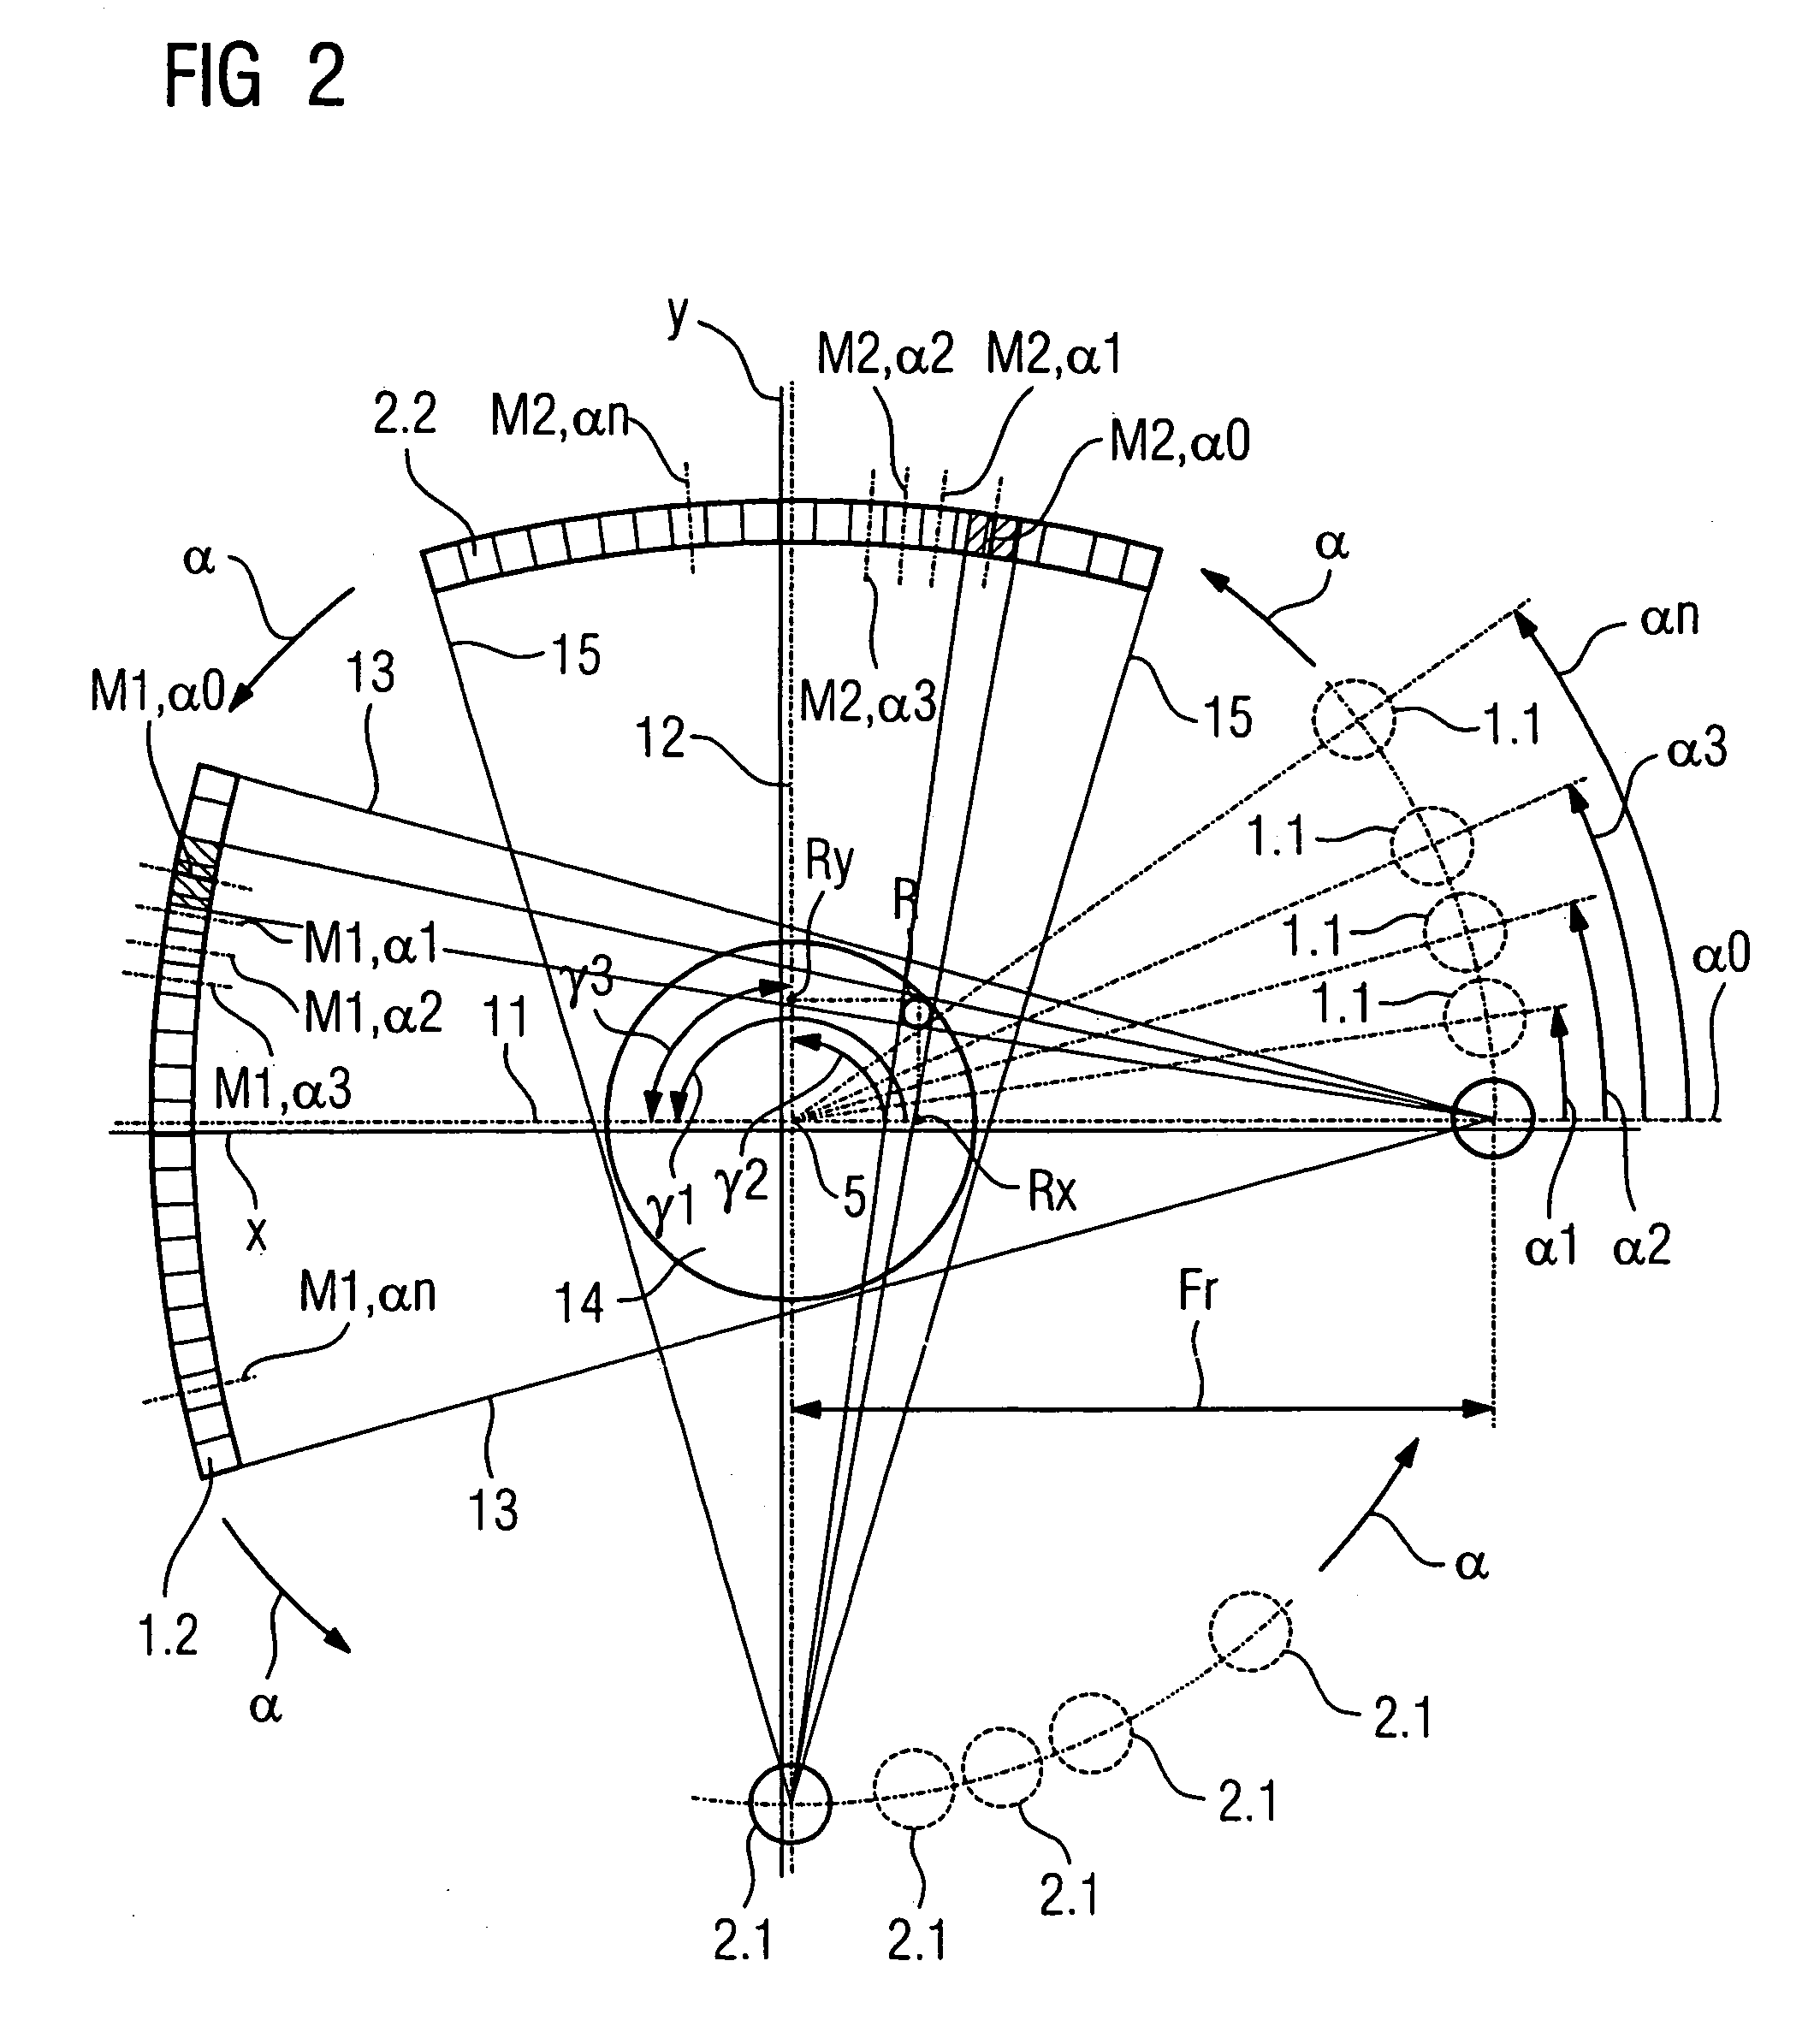 Imaging tomography apparatus with two acquisition systems, and method for determining their system angles